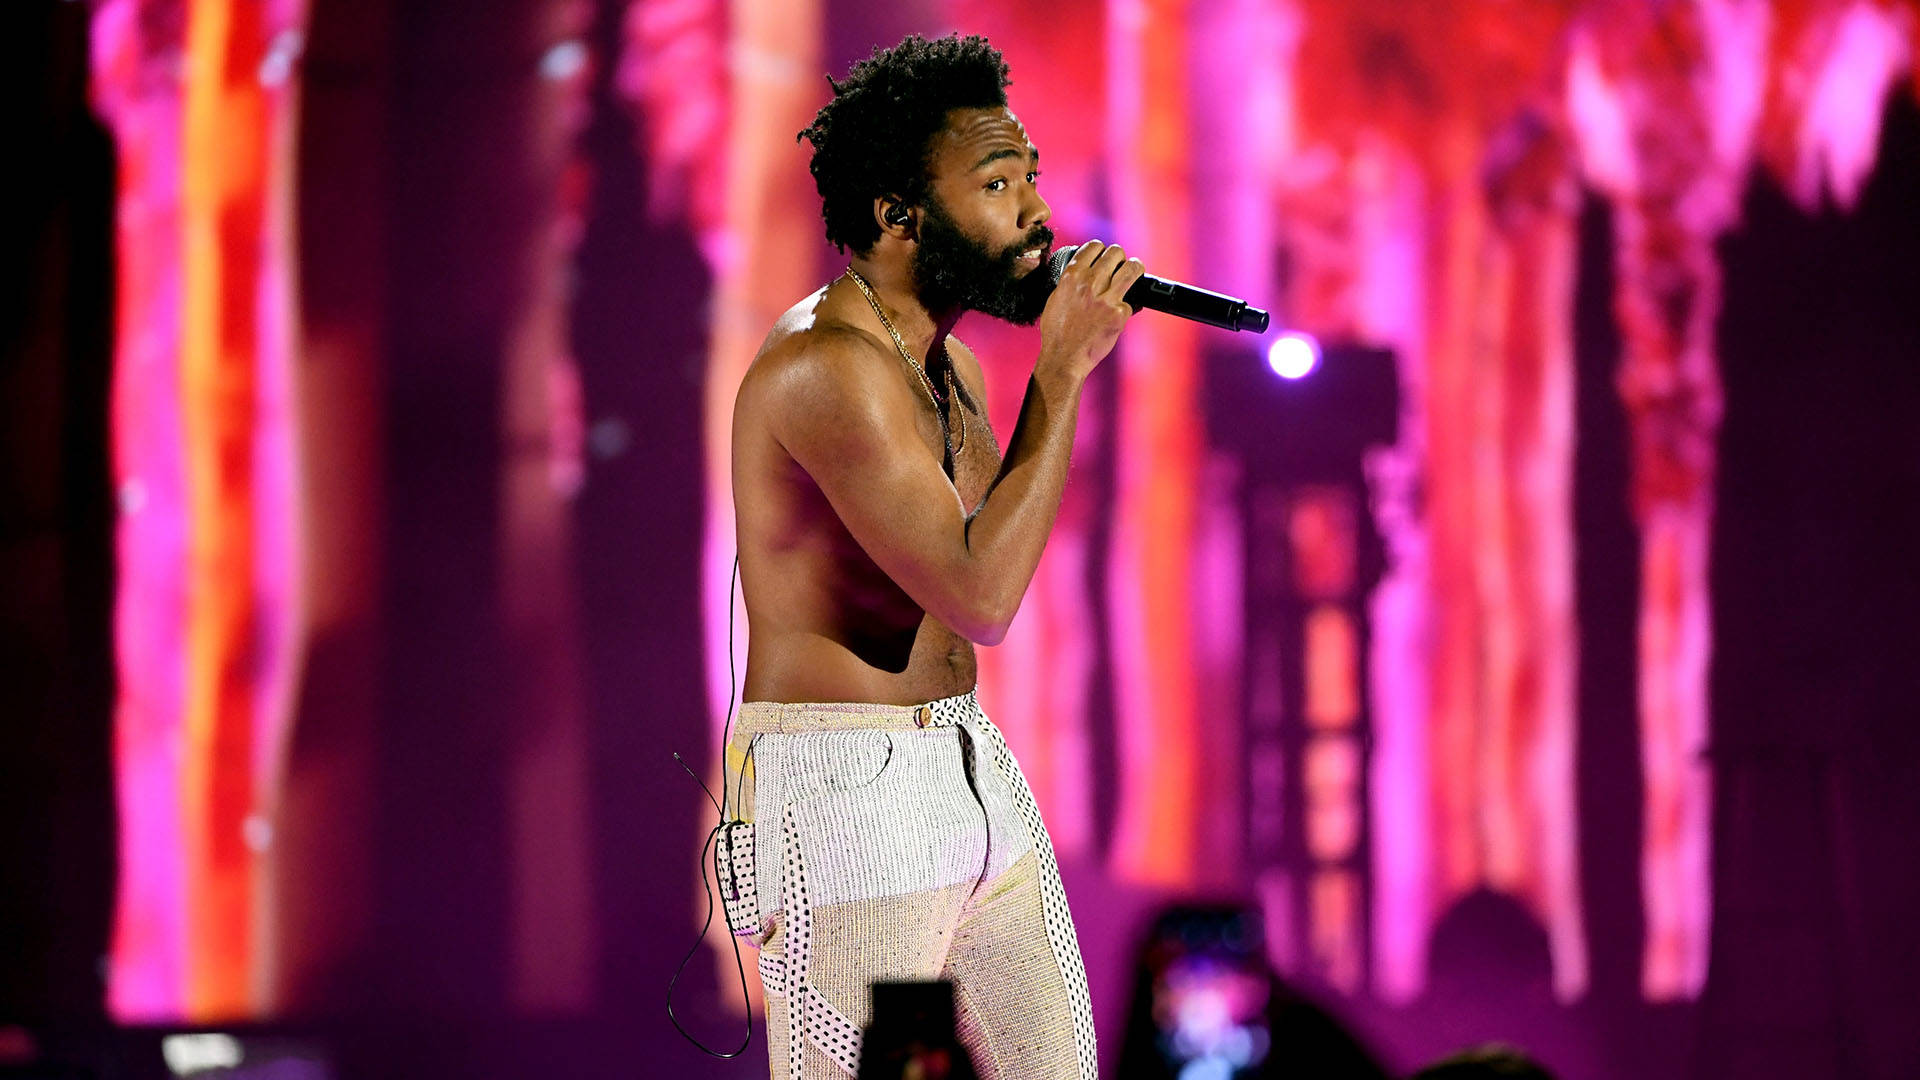 Childish Gambino  performs during the 2018 iHeartRadio Music Festival at T-Mobile Arena on September 21, 2018 in Las Vegas, Nevada. Kevin Winter/Getty Images for iHeartMedia